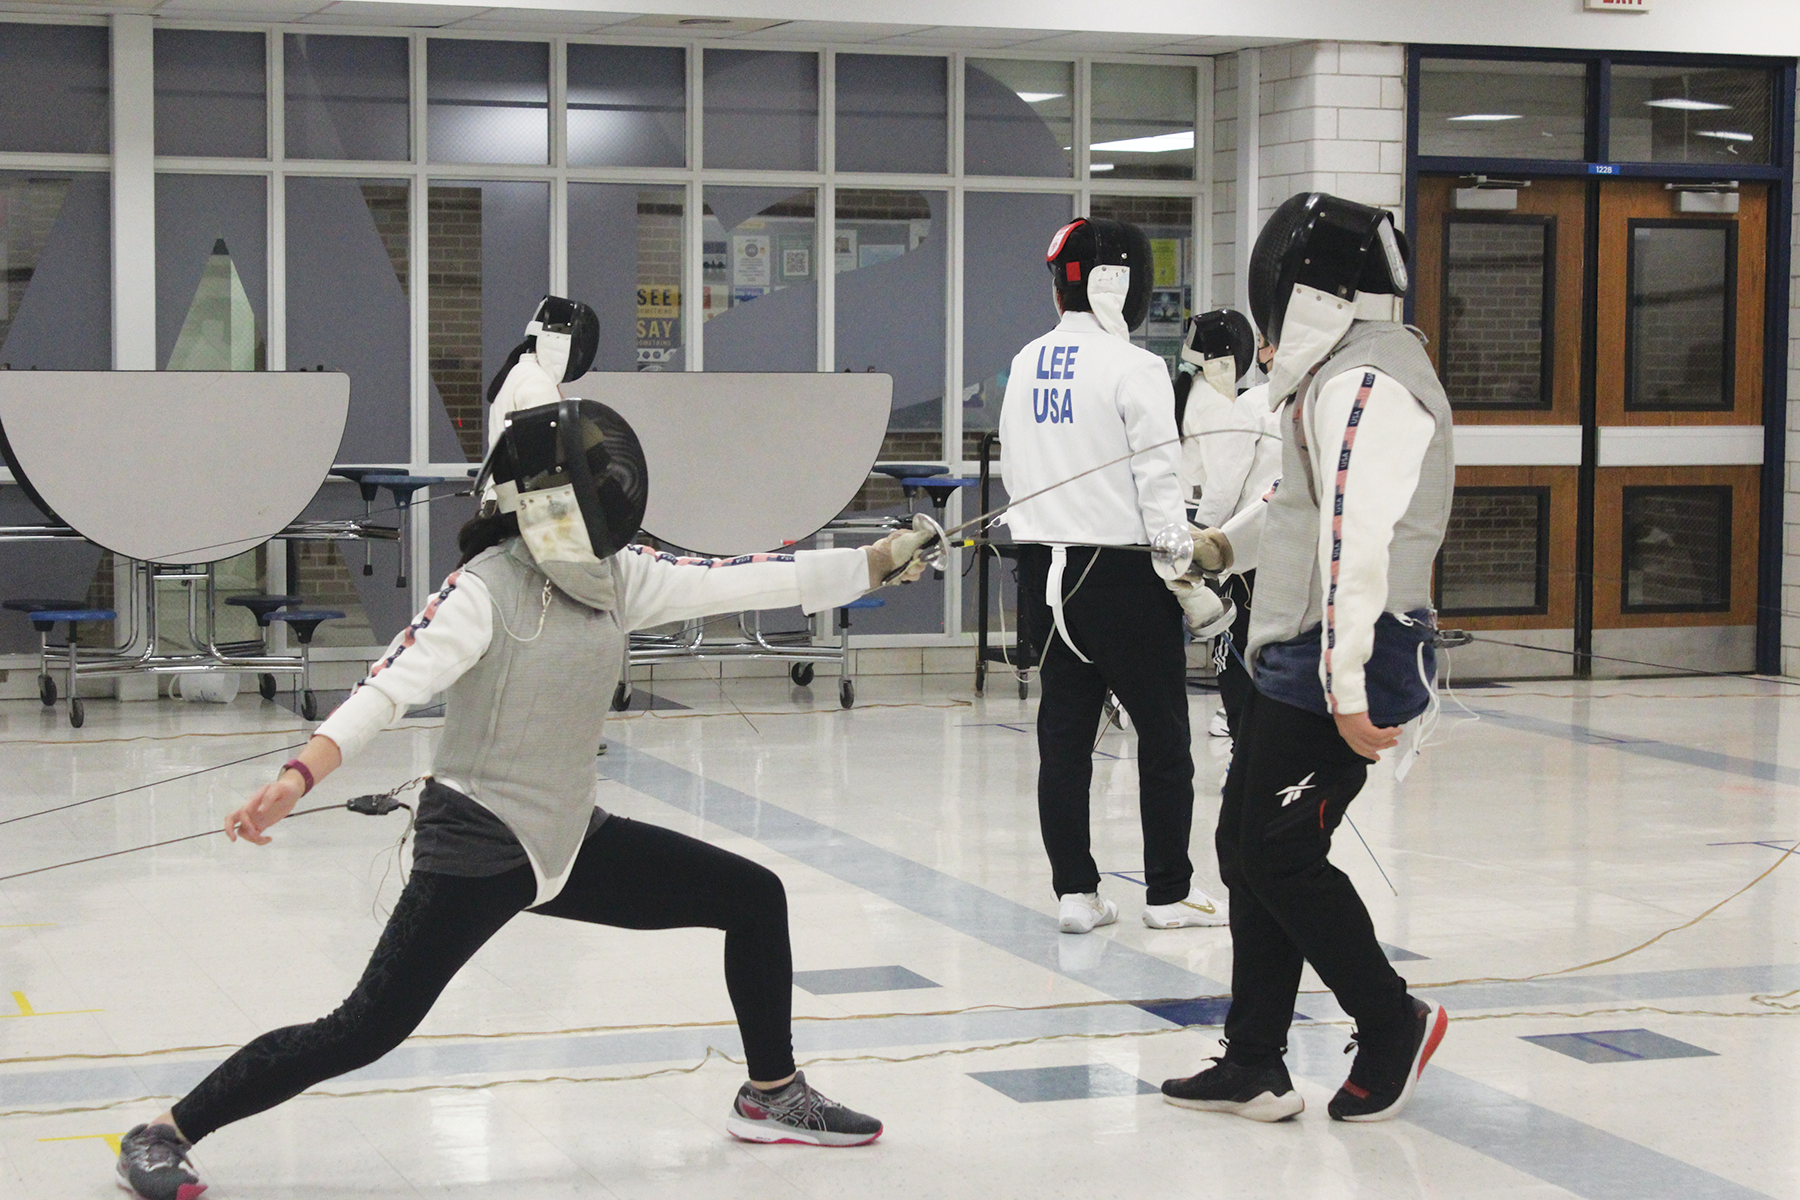 During Fencing Club, which has members from Glenbrook North and Glenbrook South, GBS junior Claire Mui (left) works on skills. A new club proposal process intends for students to be purposeful when creating clubs. Photo by Claire Satkiewicz